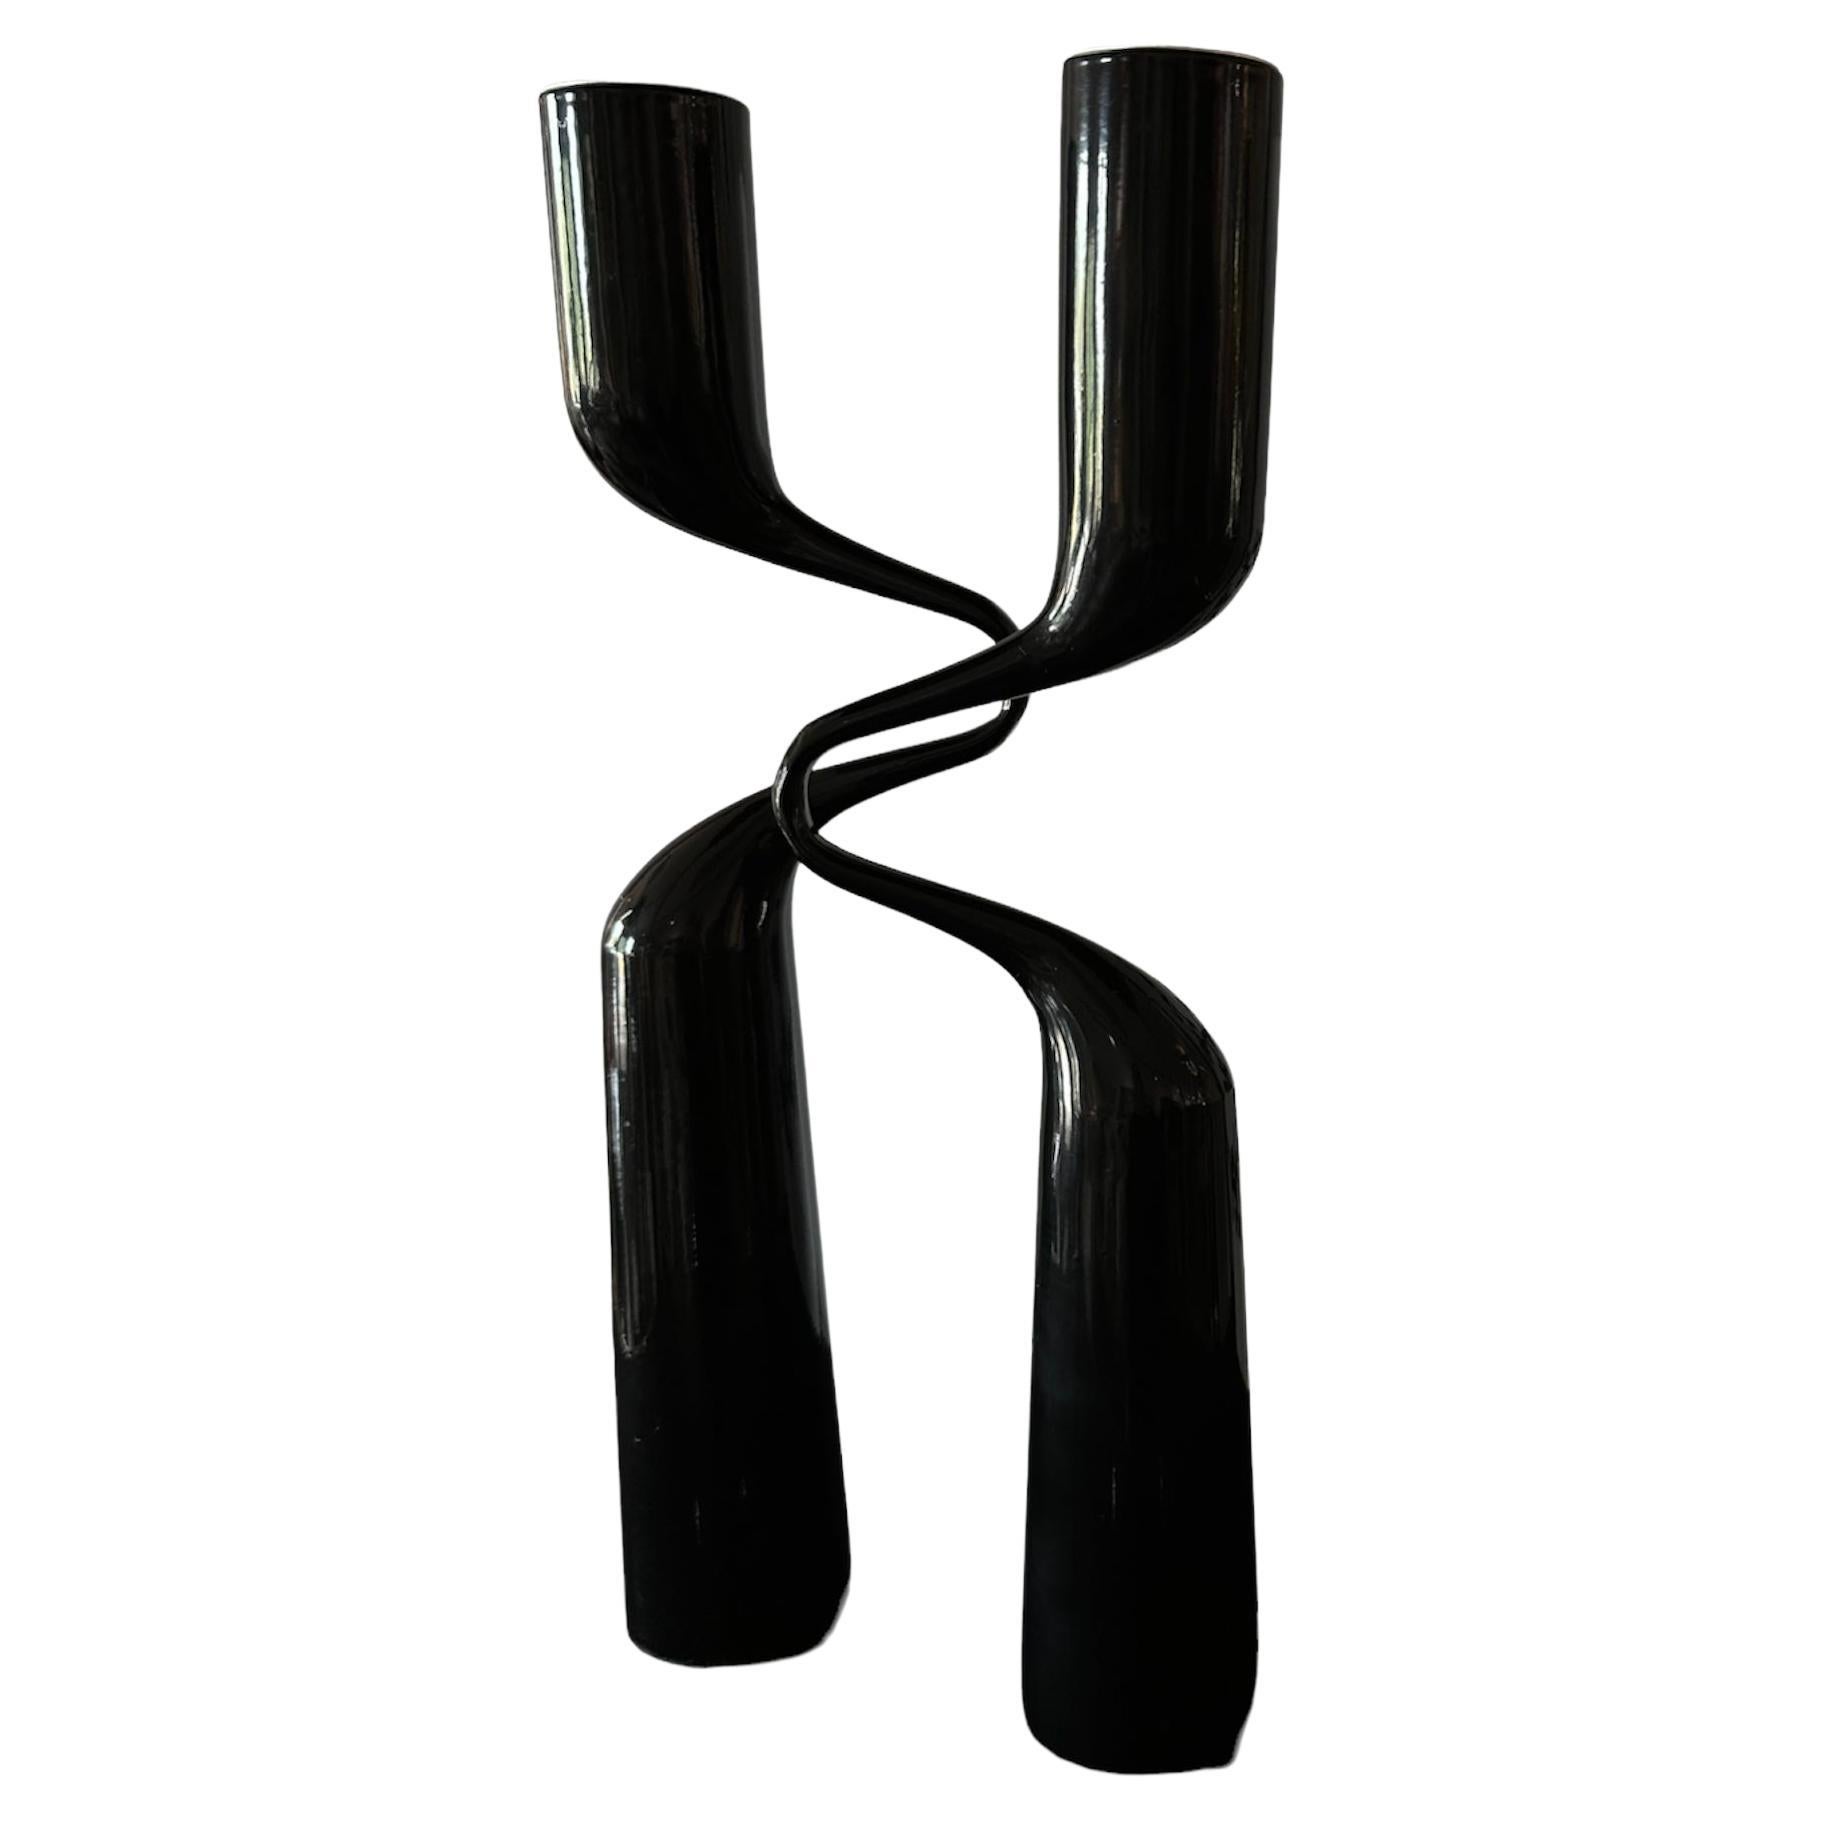 This terrific pair of candlesticks was designed by Mikaela Dorfel, who is Finnish but lives in Germany, for Menu, a Danish design company specializing in “Scandinavian Design Originals.” Produced in a number of colors, this pair is black. I think